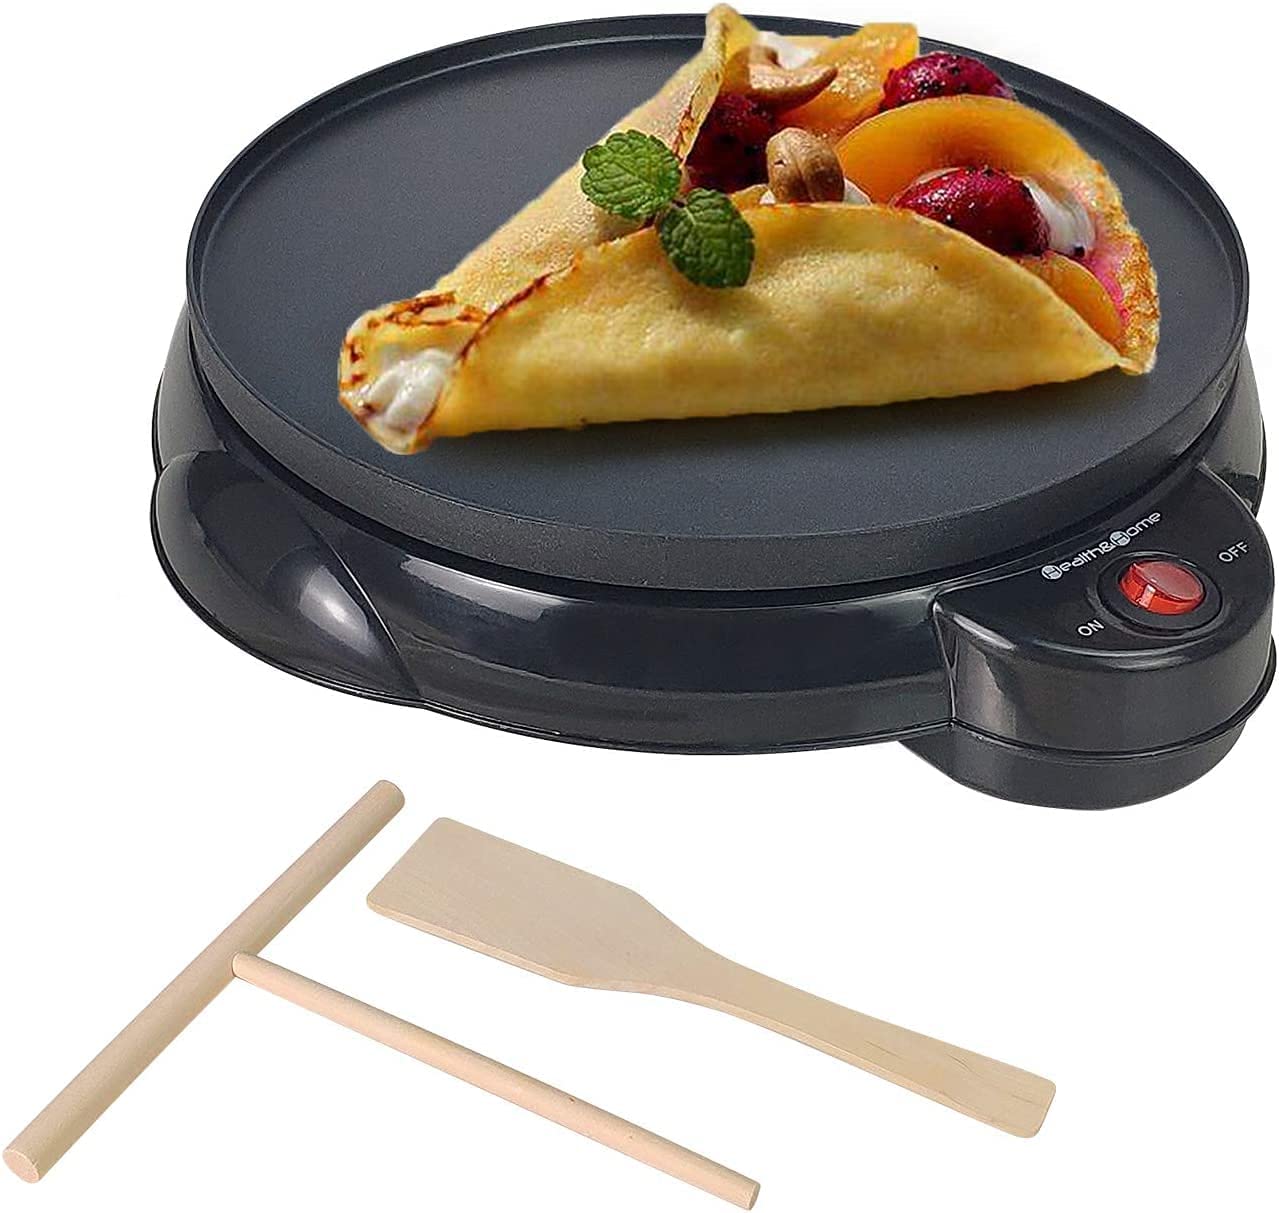 Health and Home Electric Crepe Maker – 10″Crepe Pan,Crepe Griddle, Non-stick Pancake Maker – Easy Clean & Includes Wooden Spatula, Batter Spreader